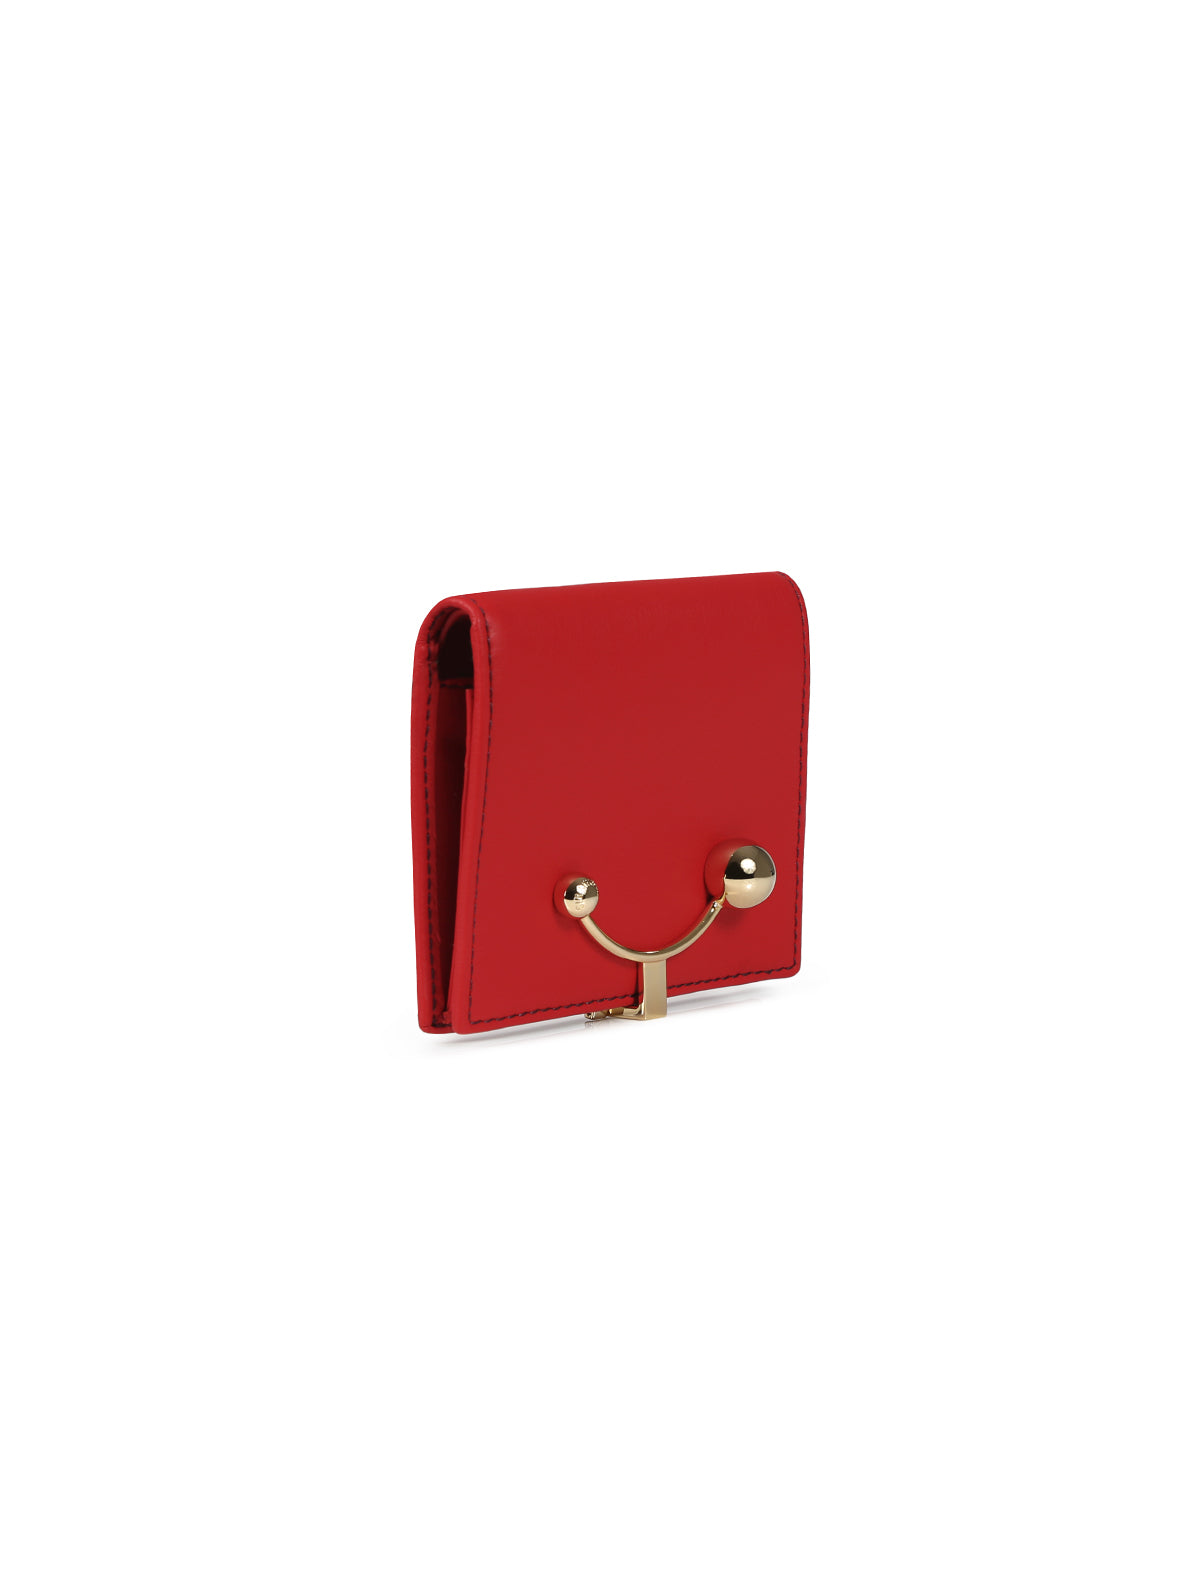 STRATHBERRY Crescent Wallet in Grain Leather in Ruby